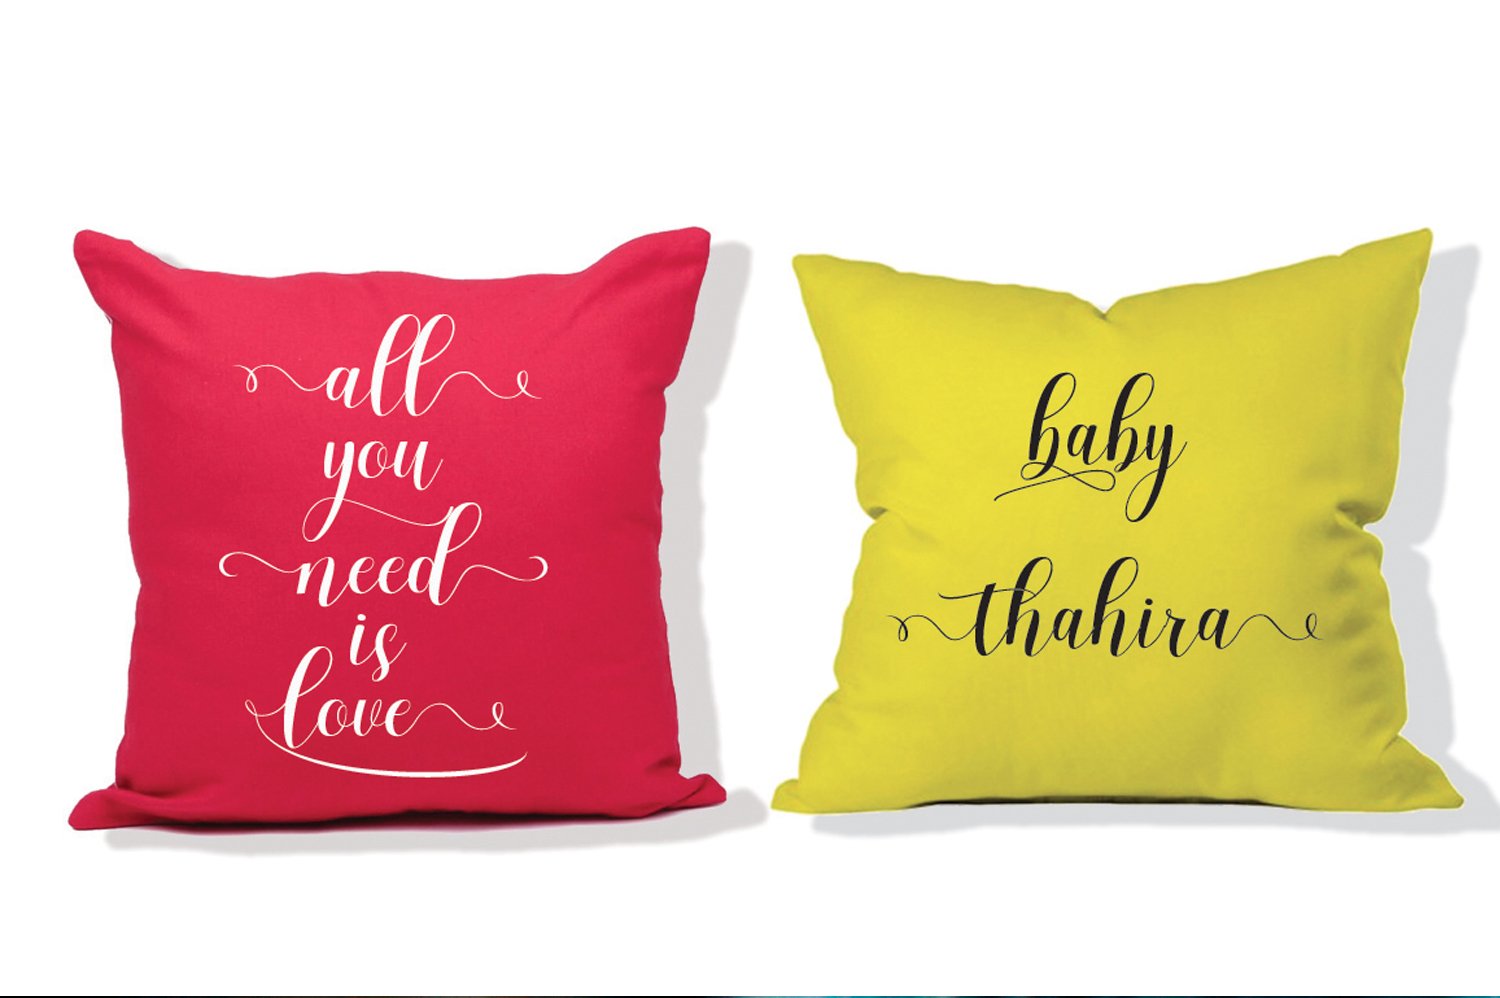 Pink and dirty yellow pillows with white and black lettering on a white background.